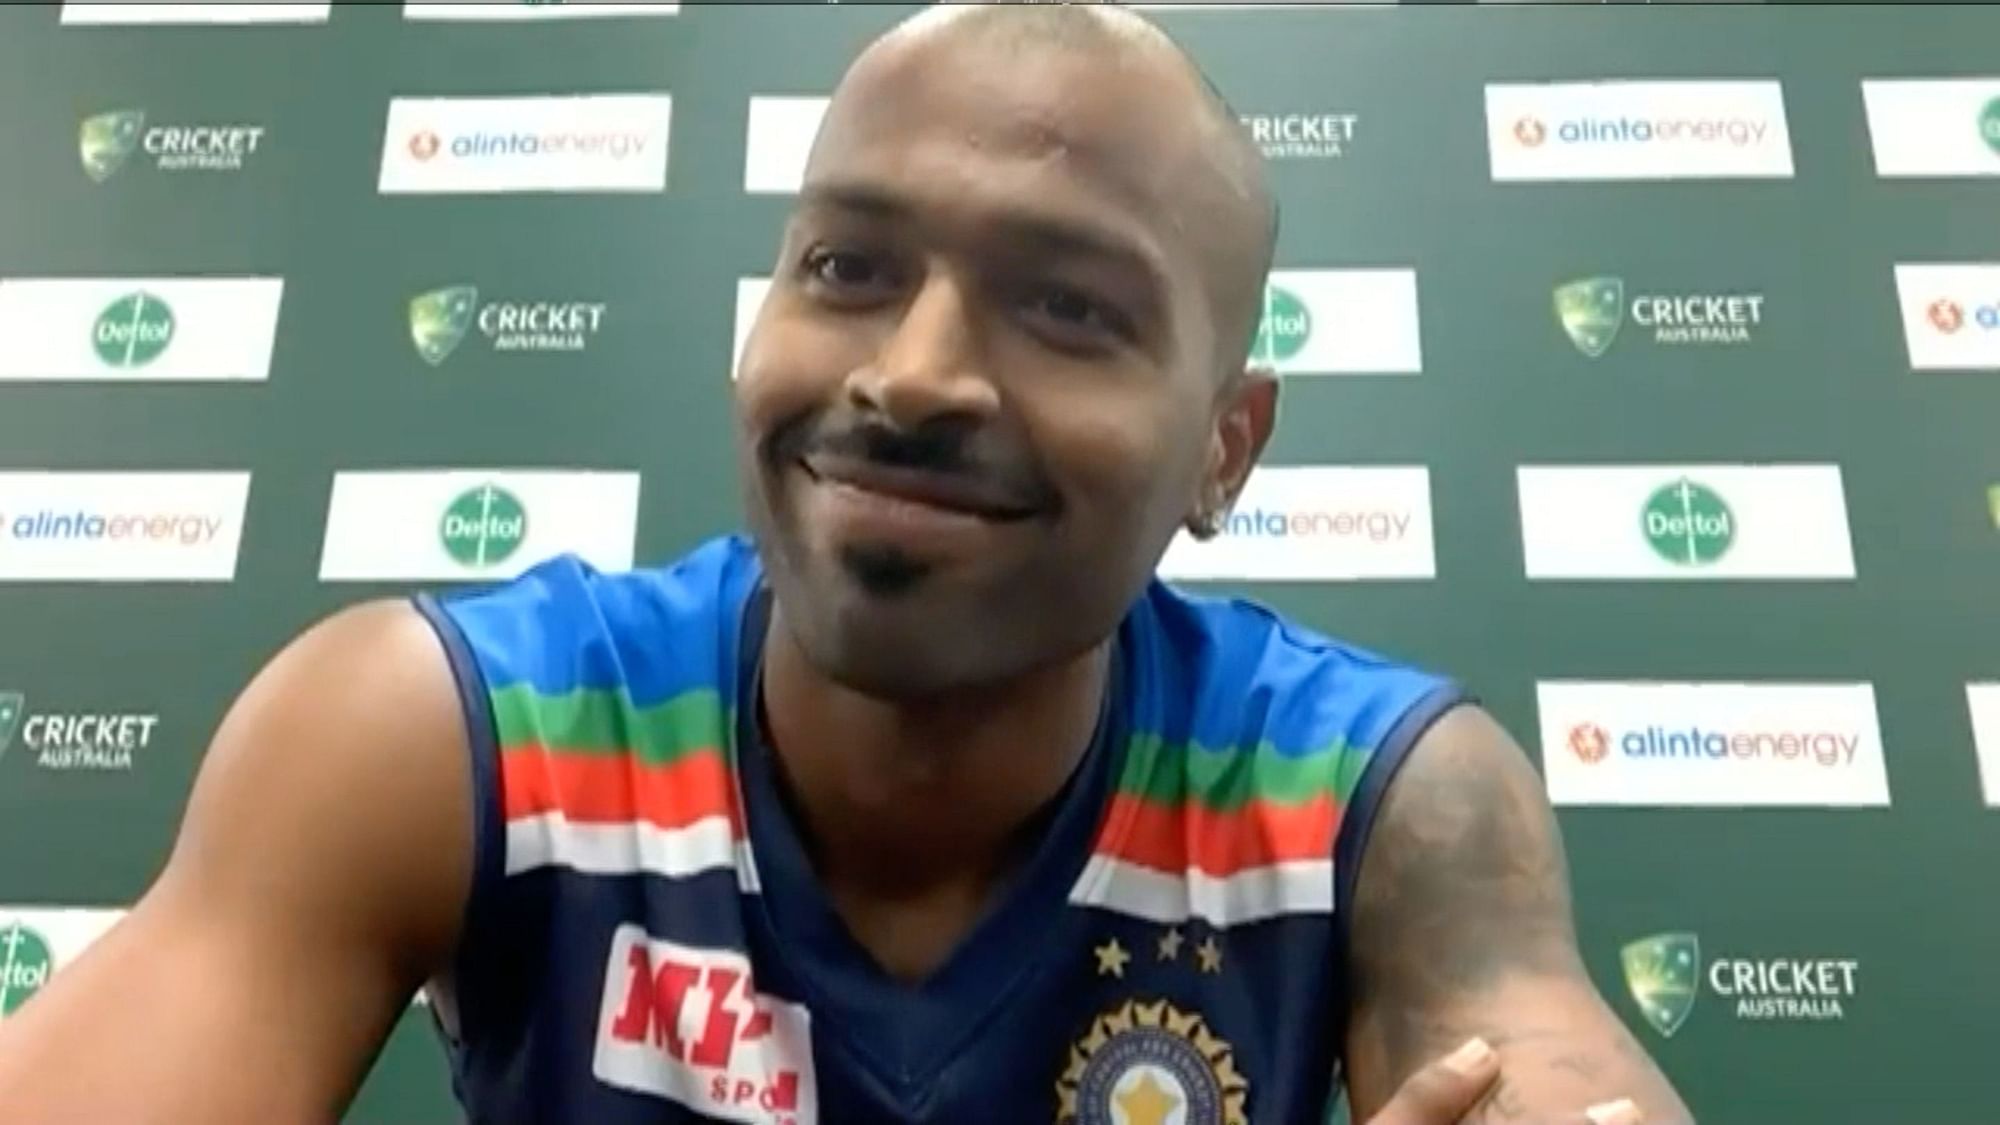 Hardik Pandya said that he was focussing and preparing himself to play purely as a batsman till he gets match-ready to bowl.